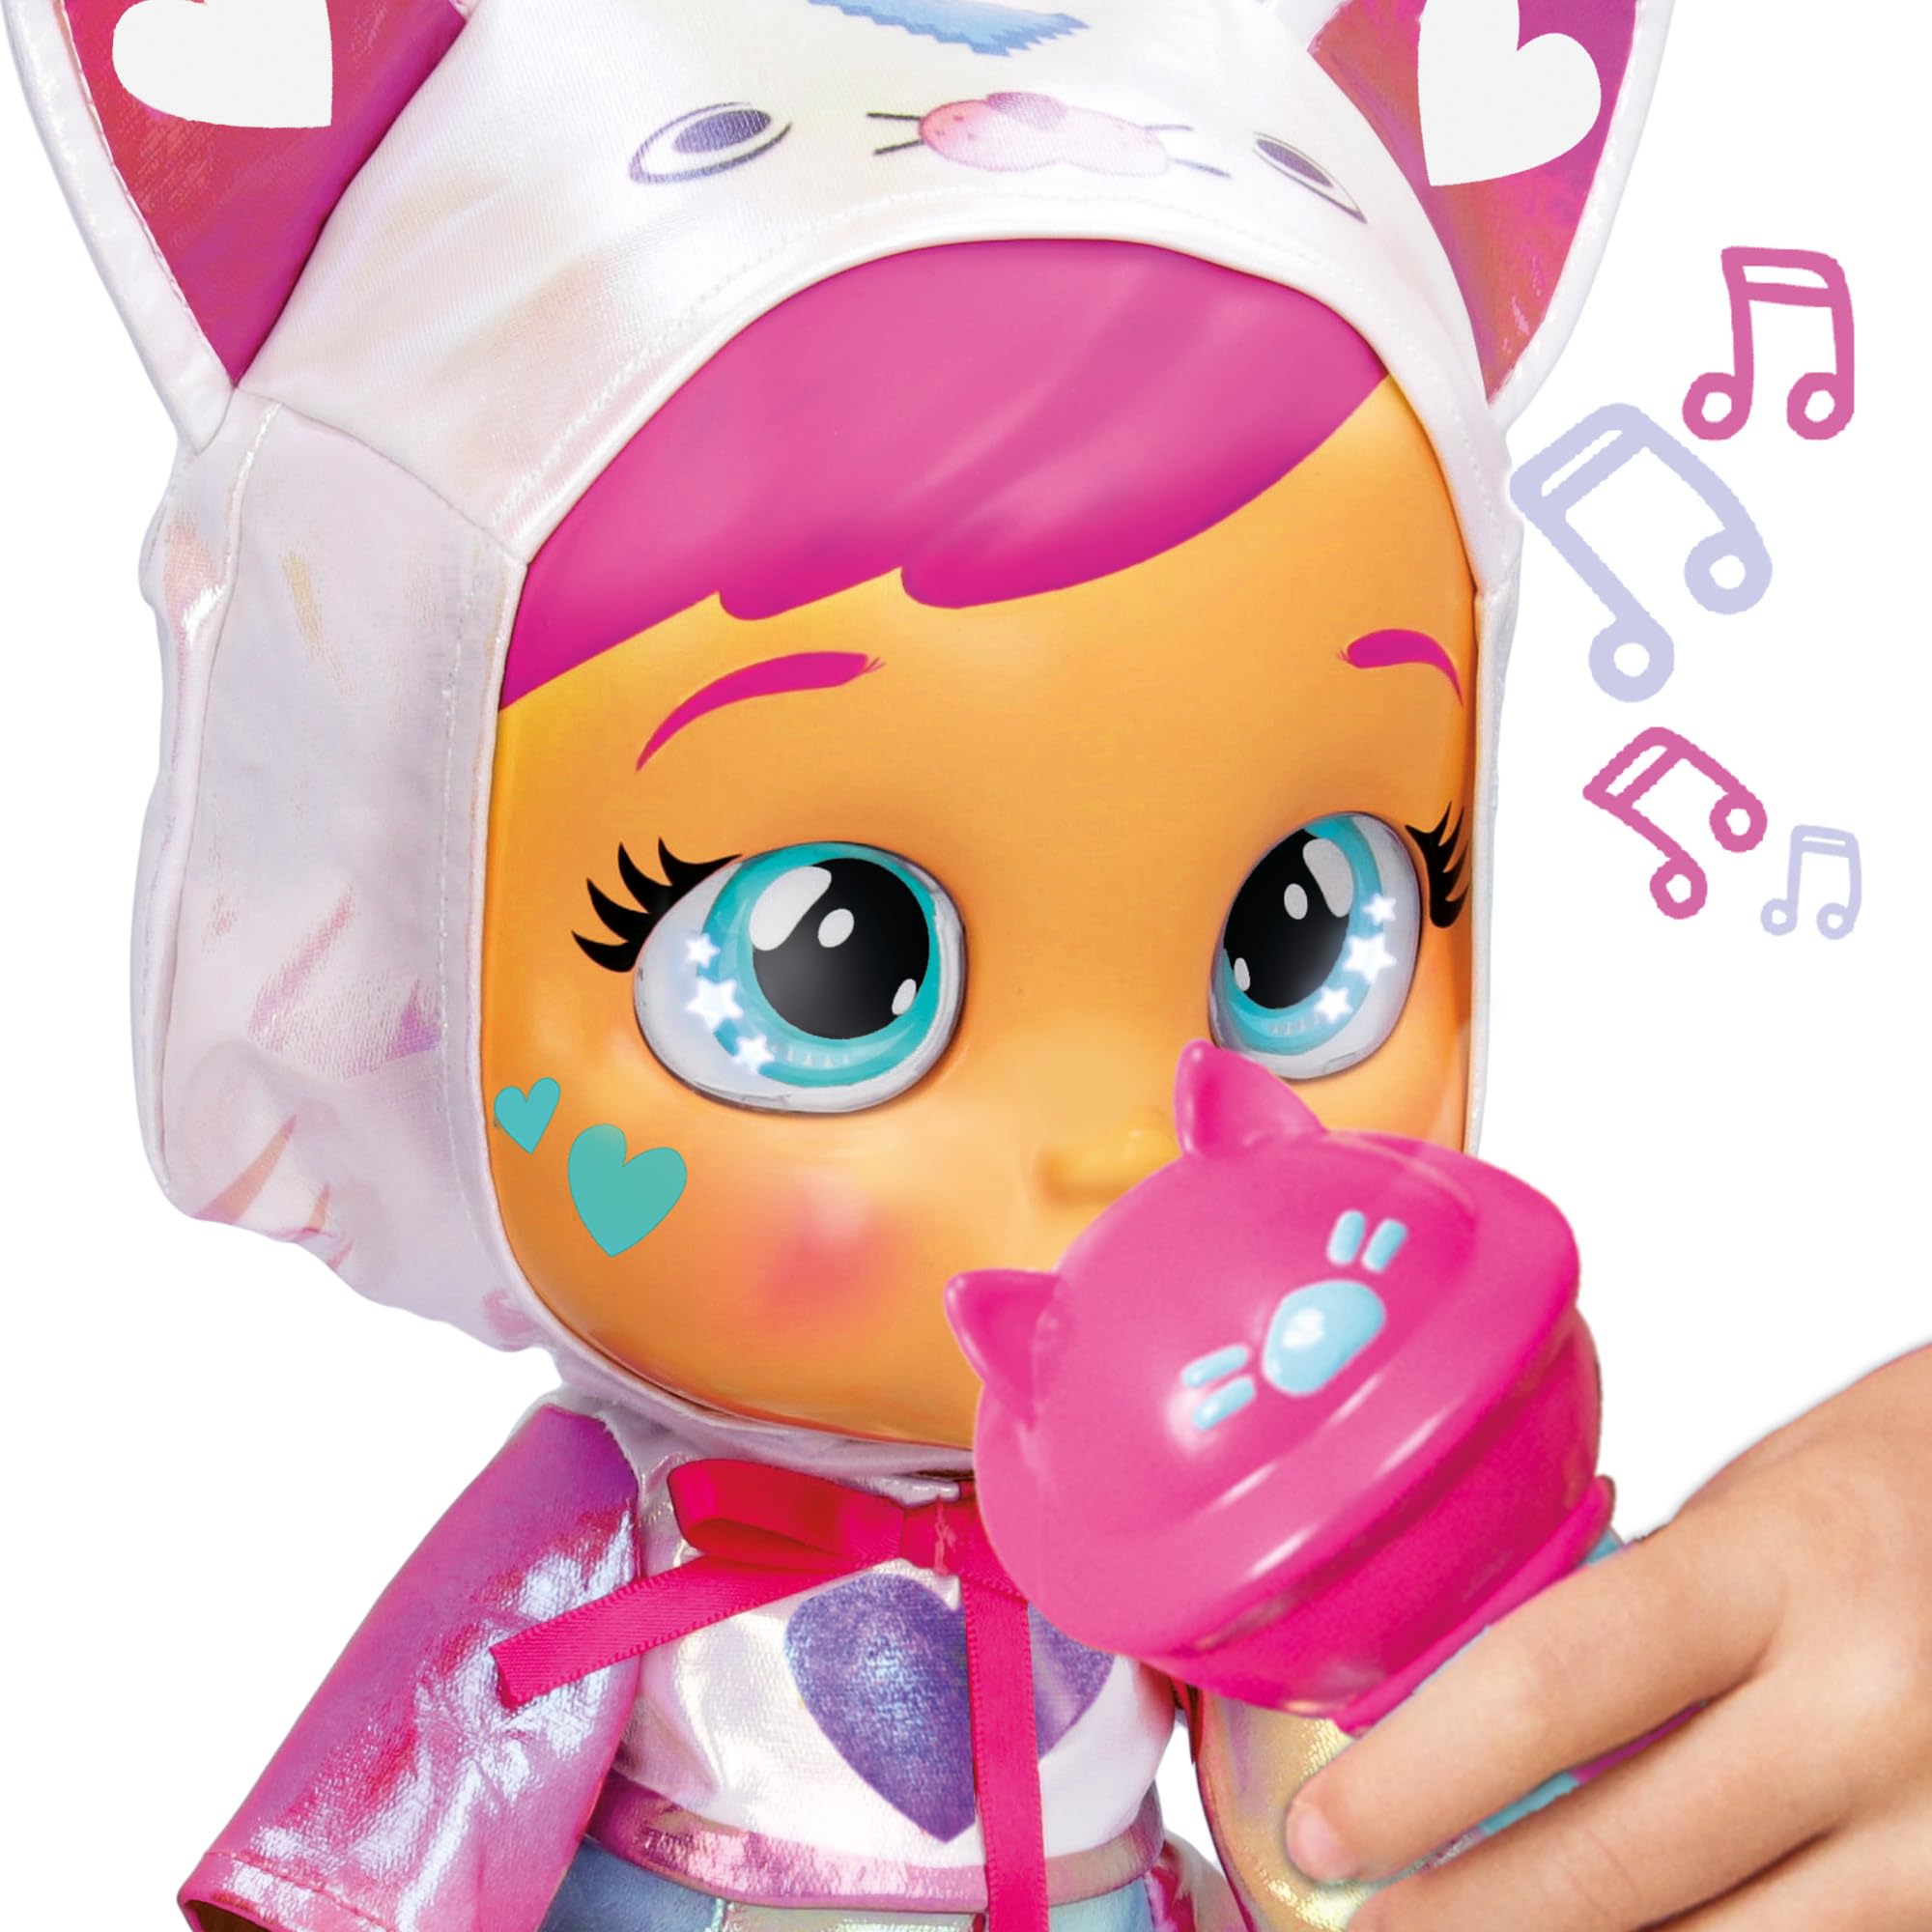 Cry Babies Stars Singing Daisy - 12'' Singing Baby Doll | Plays 15+ Realistic Baby Sounds, Multicolor